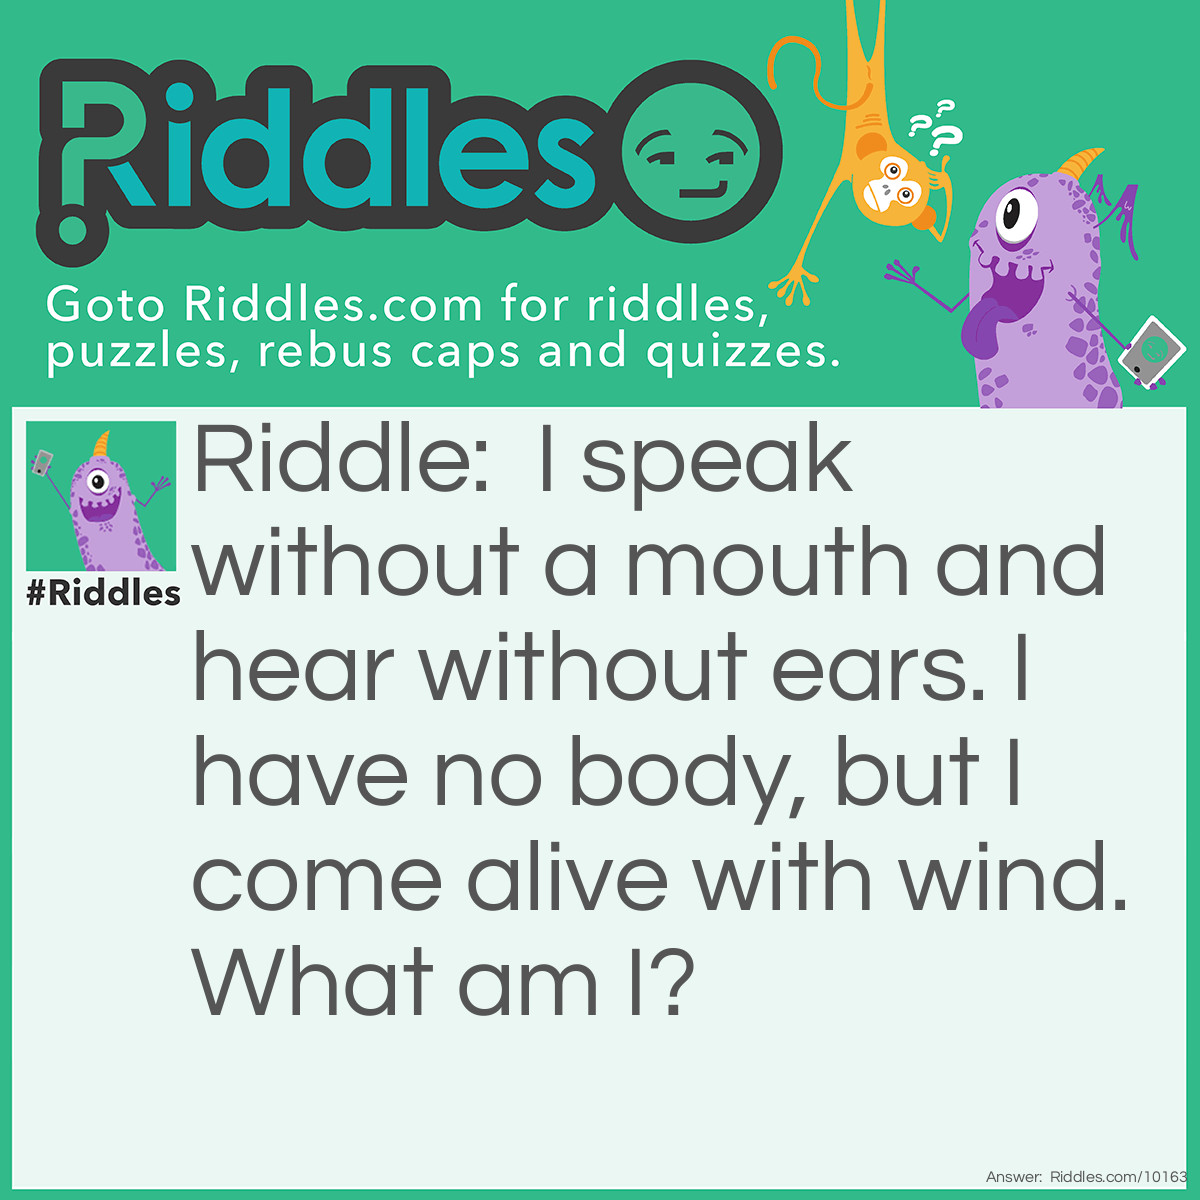 Riddle: I speak without a mouth and hear without ears. I have no body, but I come alive with wind. What am I? Answer: An echo!